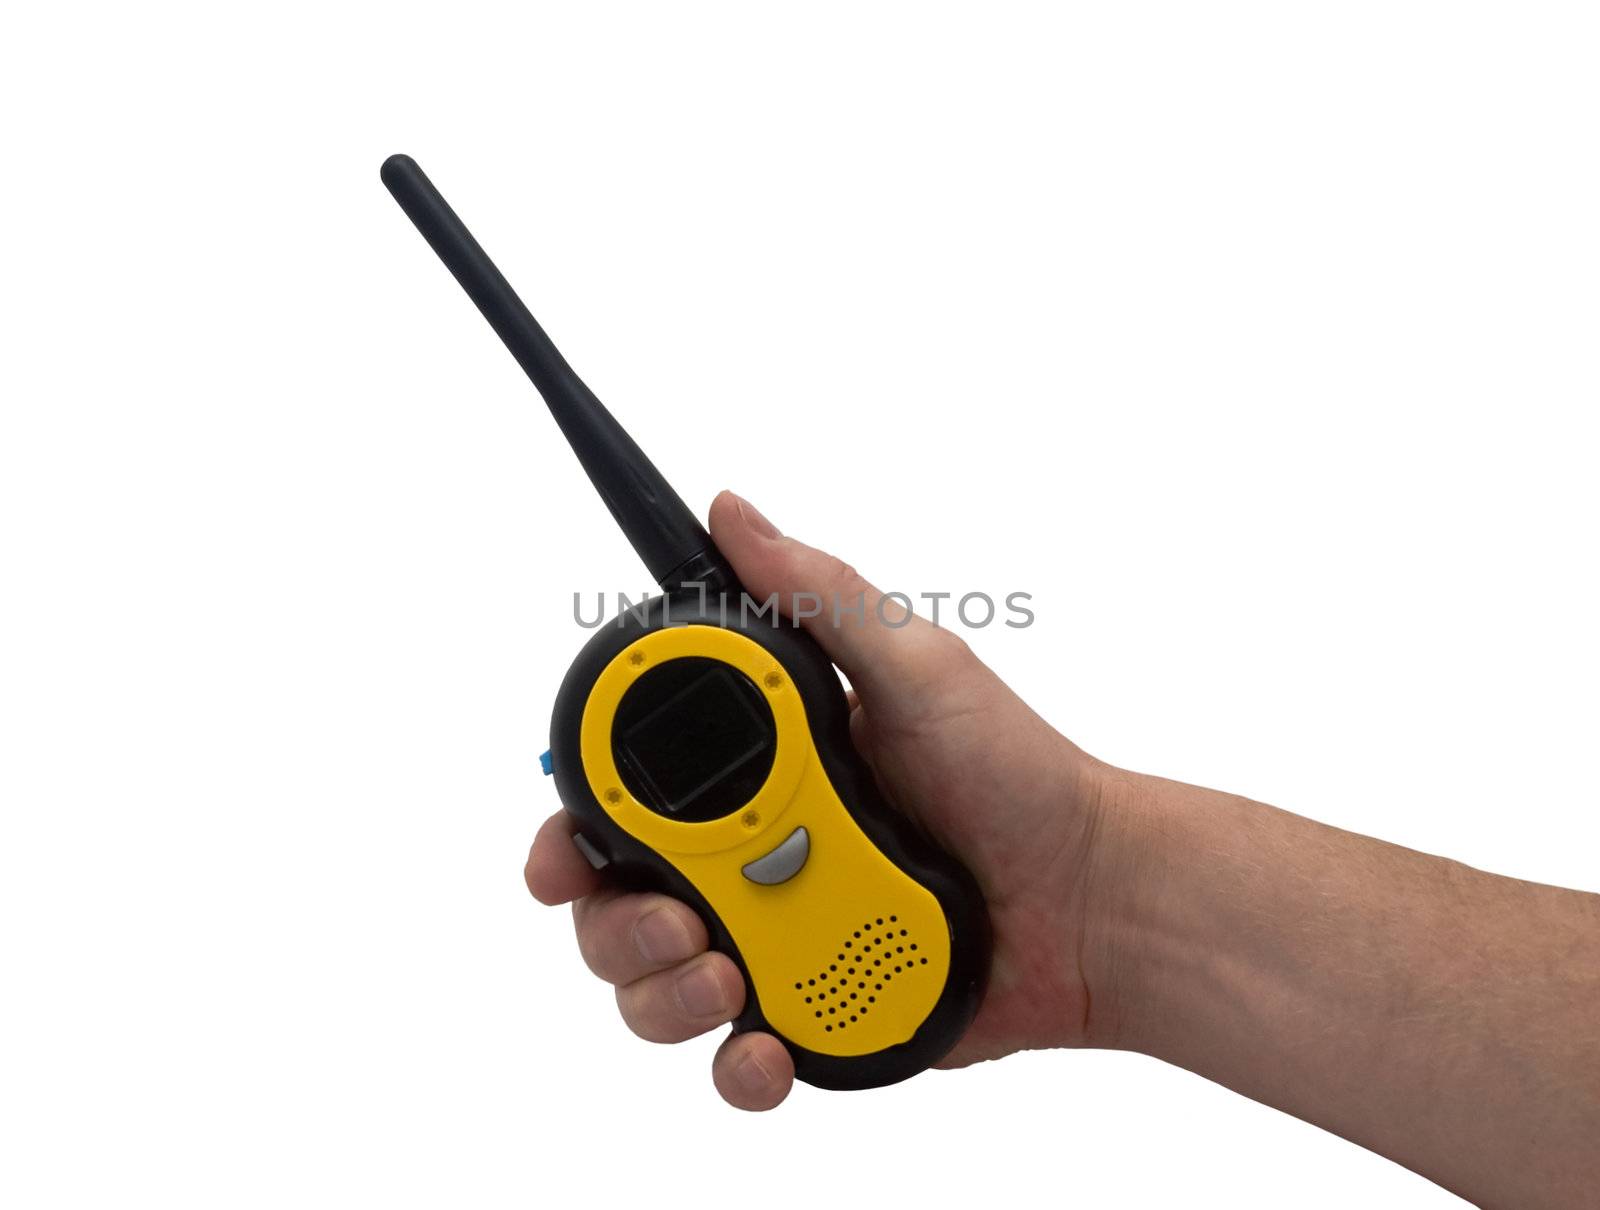 an isolated over white caucasian man's hand holding and pressing a button on a walkie talkie / 2 way radio.